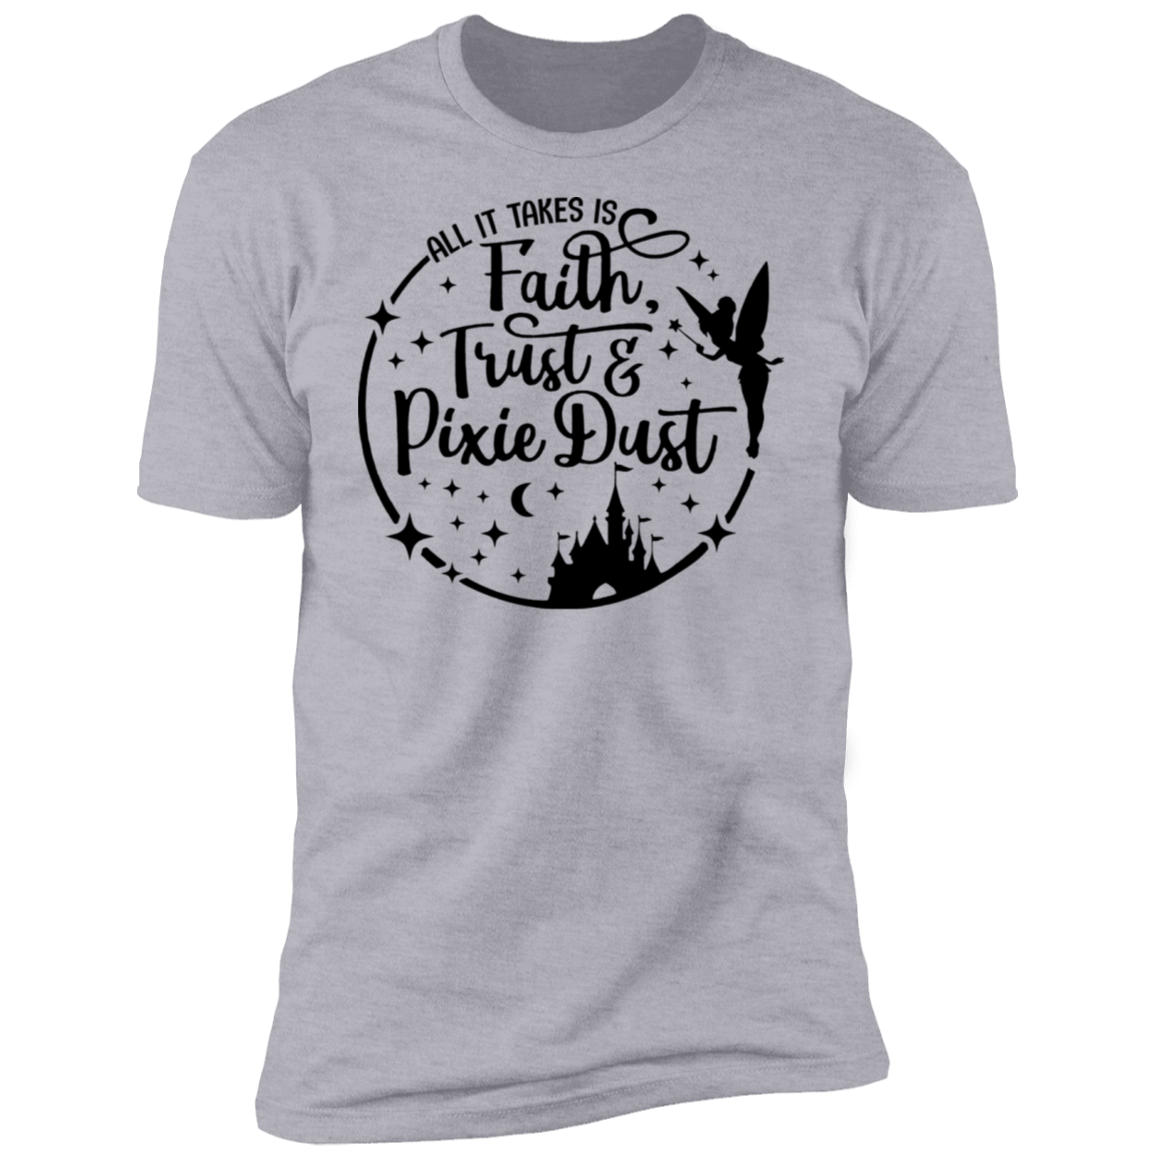 All It Takes Is Faith, Trust and Pixie Dust V1 Premium Short Sleeve T-Shirt